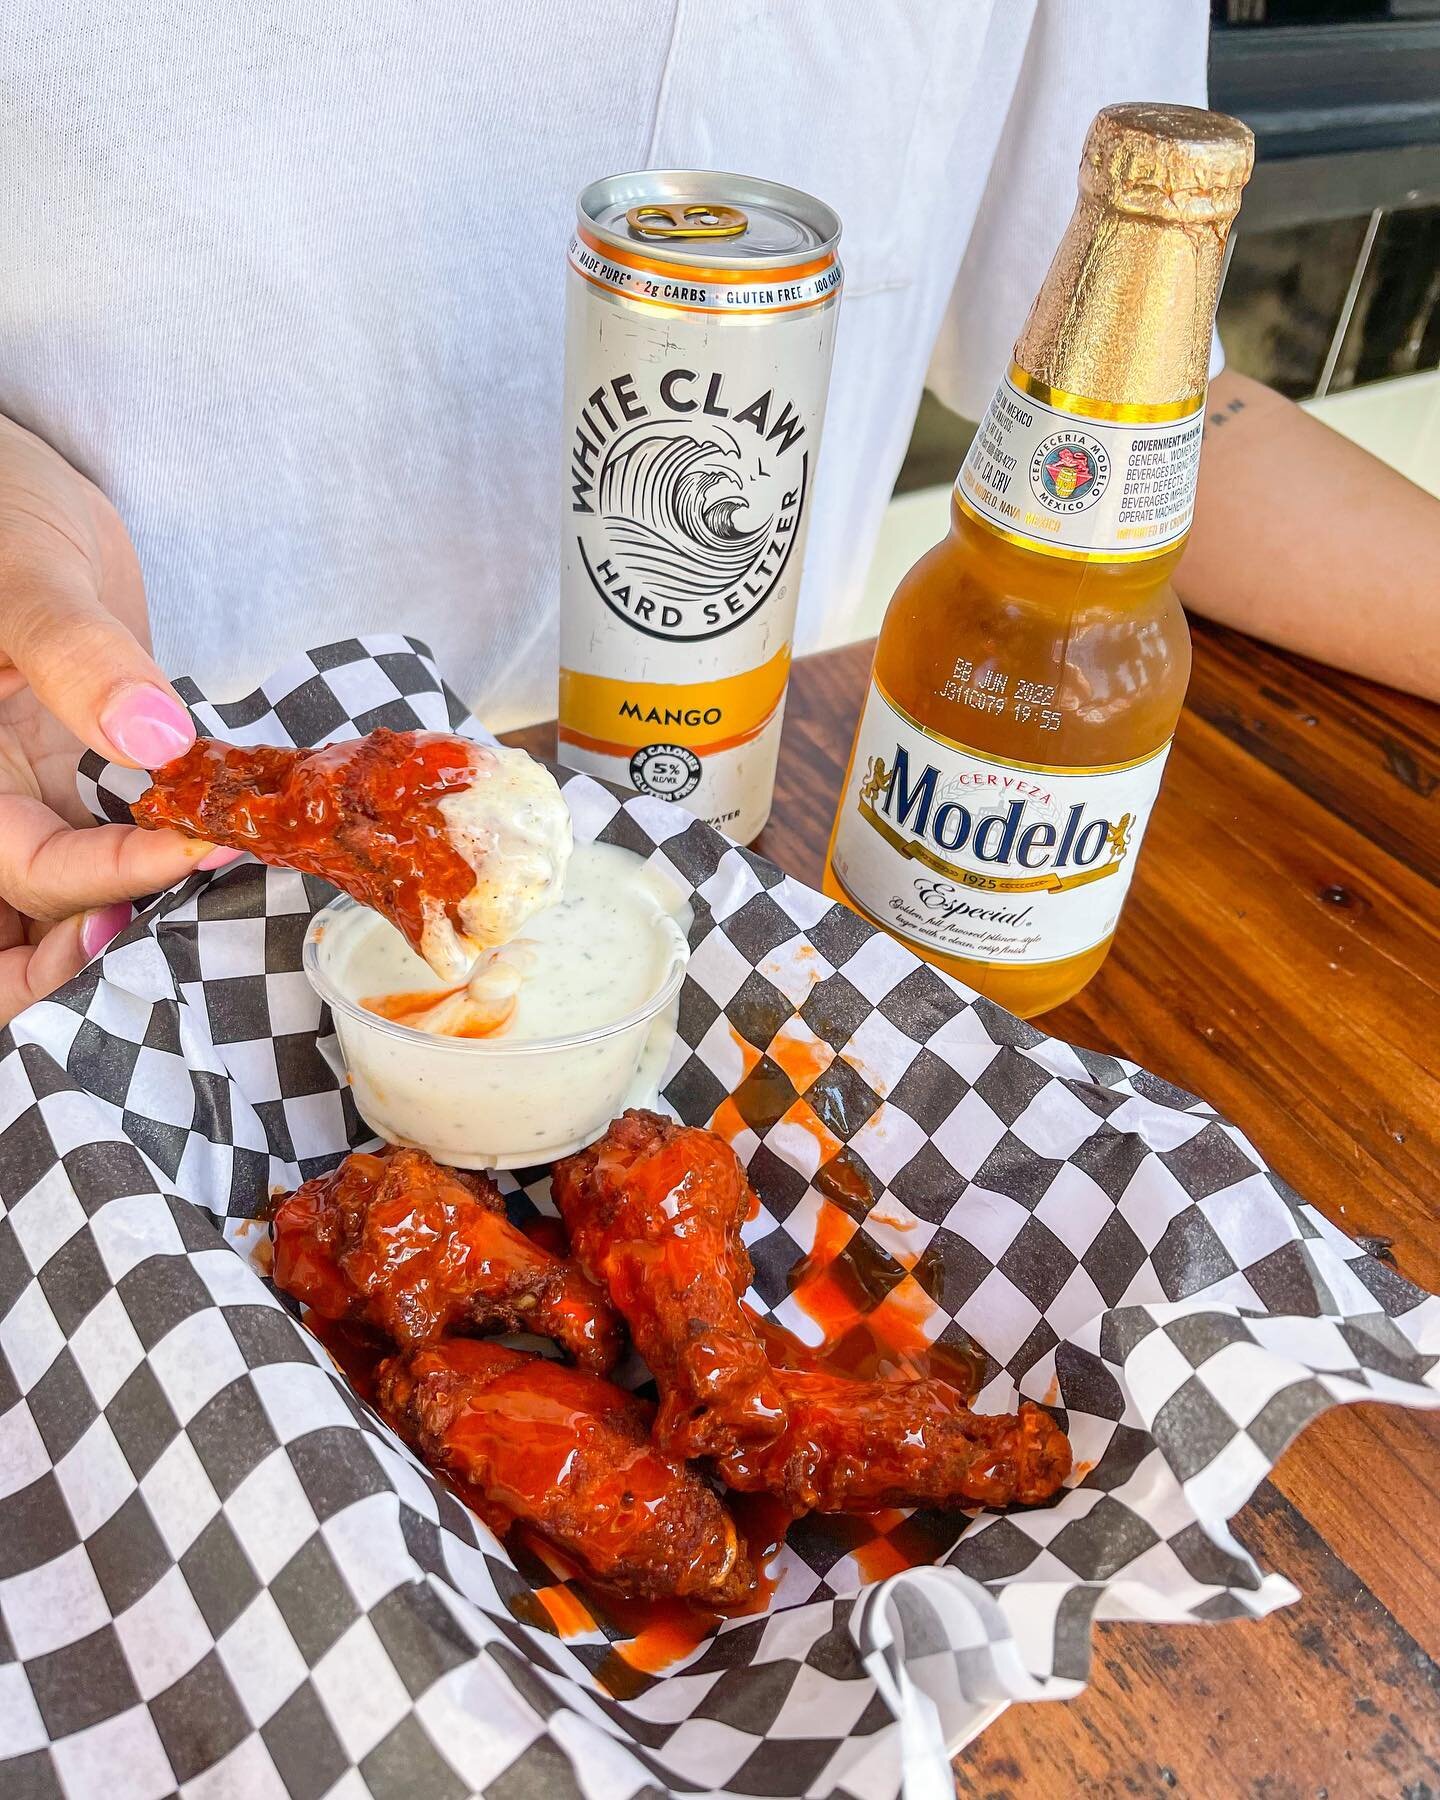 Wings and an ice cold bev sounds like the perfect combo to handle this heatwave 🔥🔥 

Order at any of our 3 locations:
📍Glenoaks Blvd, Burbank
📍Foothill Blvd, La Crescenta 
📍Woodman Ave, Sherman Oaks

Hours Mon-Sun 10am-10pm

#AmeciPK 🍕